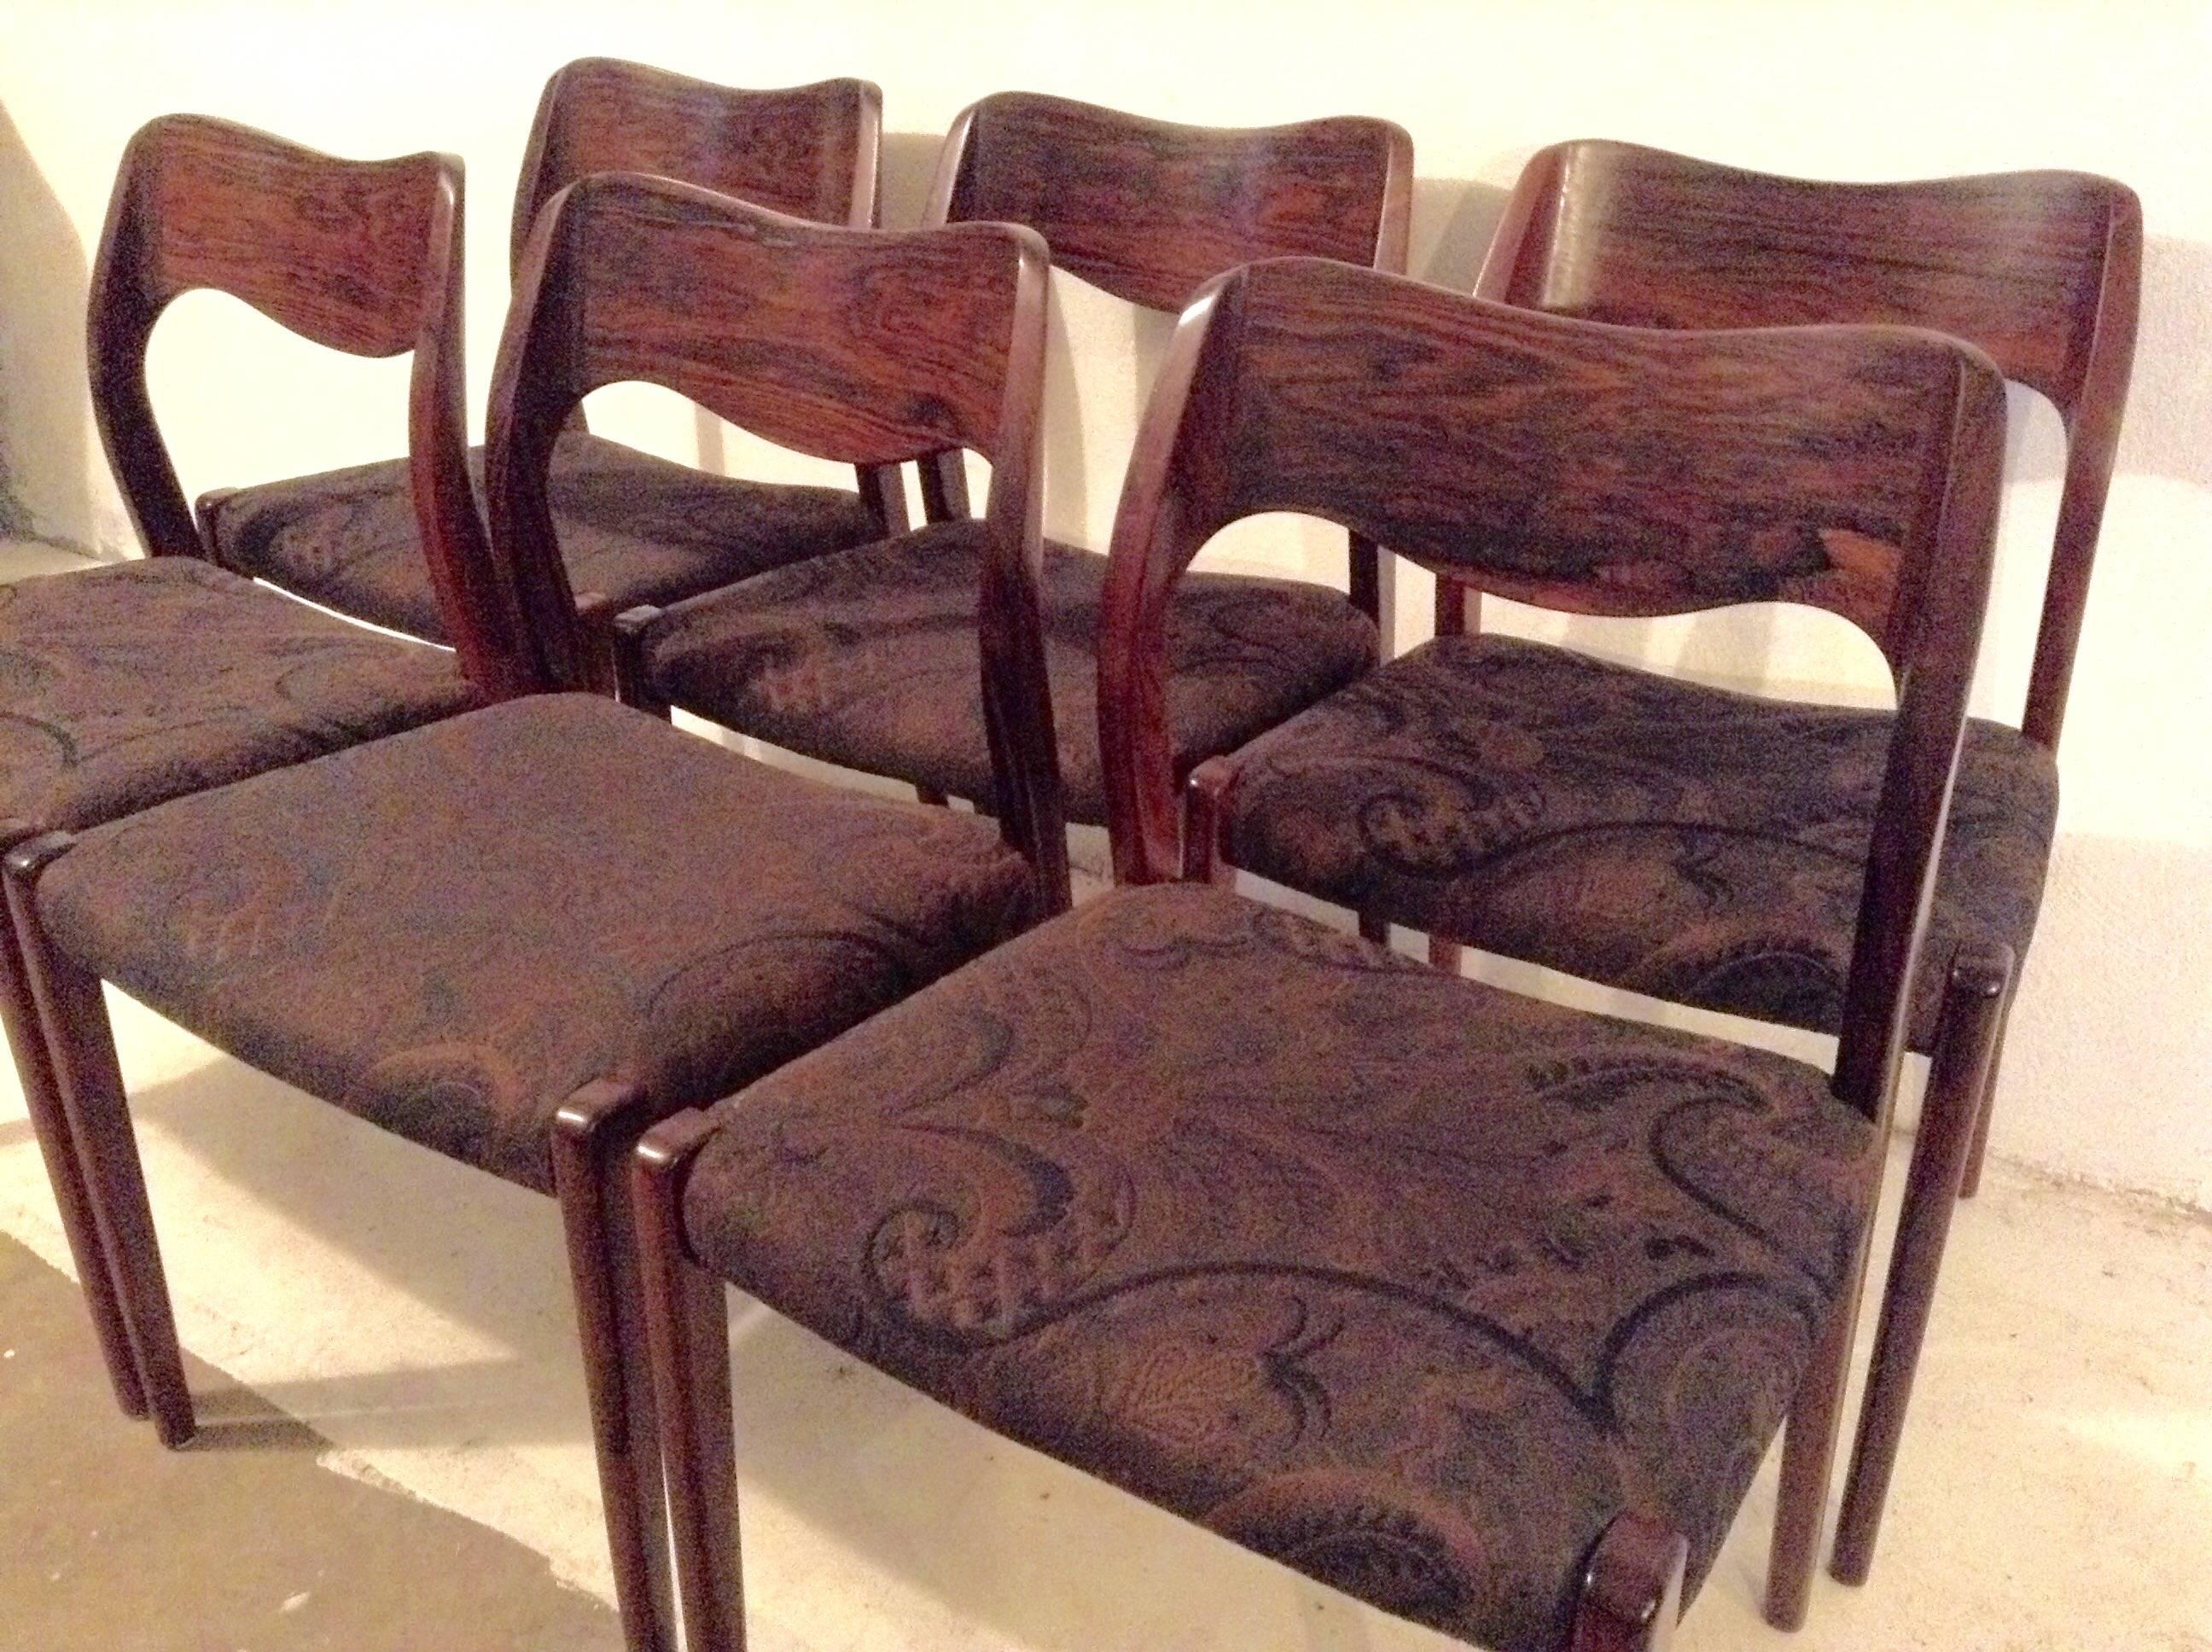 Stunning set of six matching dining chairs designed by Niels Otto Møller, Model # 71, amazing figured Brazilian rosewood, Classic Danish Modern style, Fresh and contemporary today as when they were designed in the 1950s.